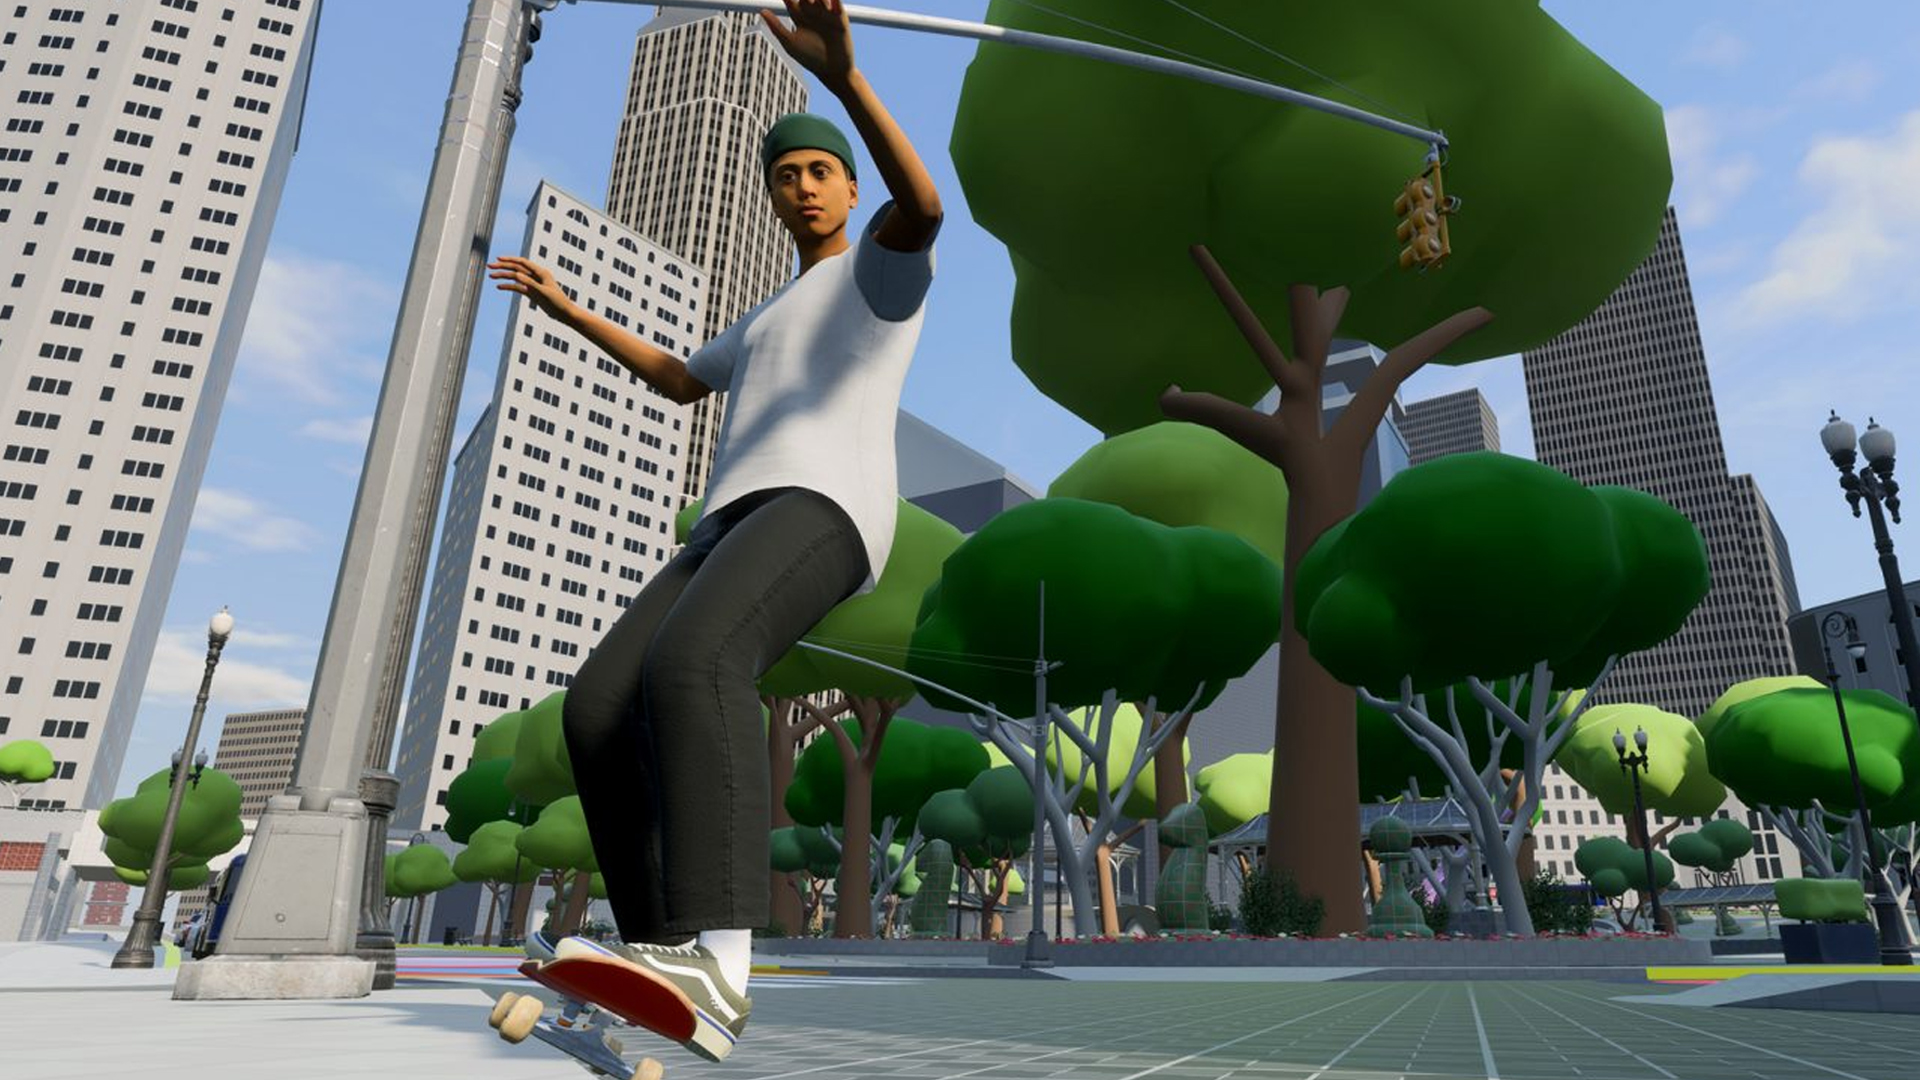 Skate. console playtest news could be coming soon